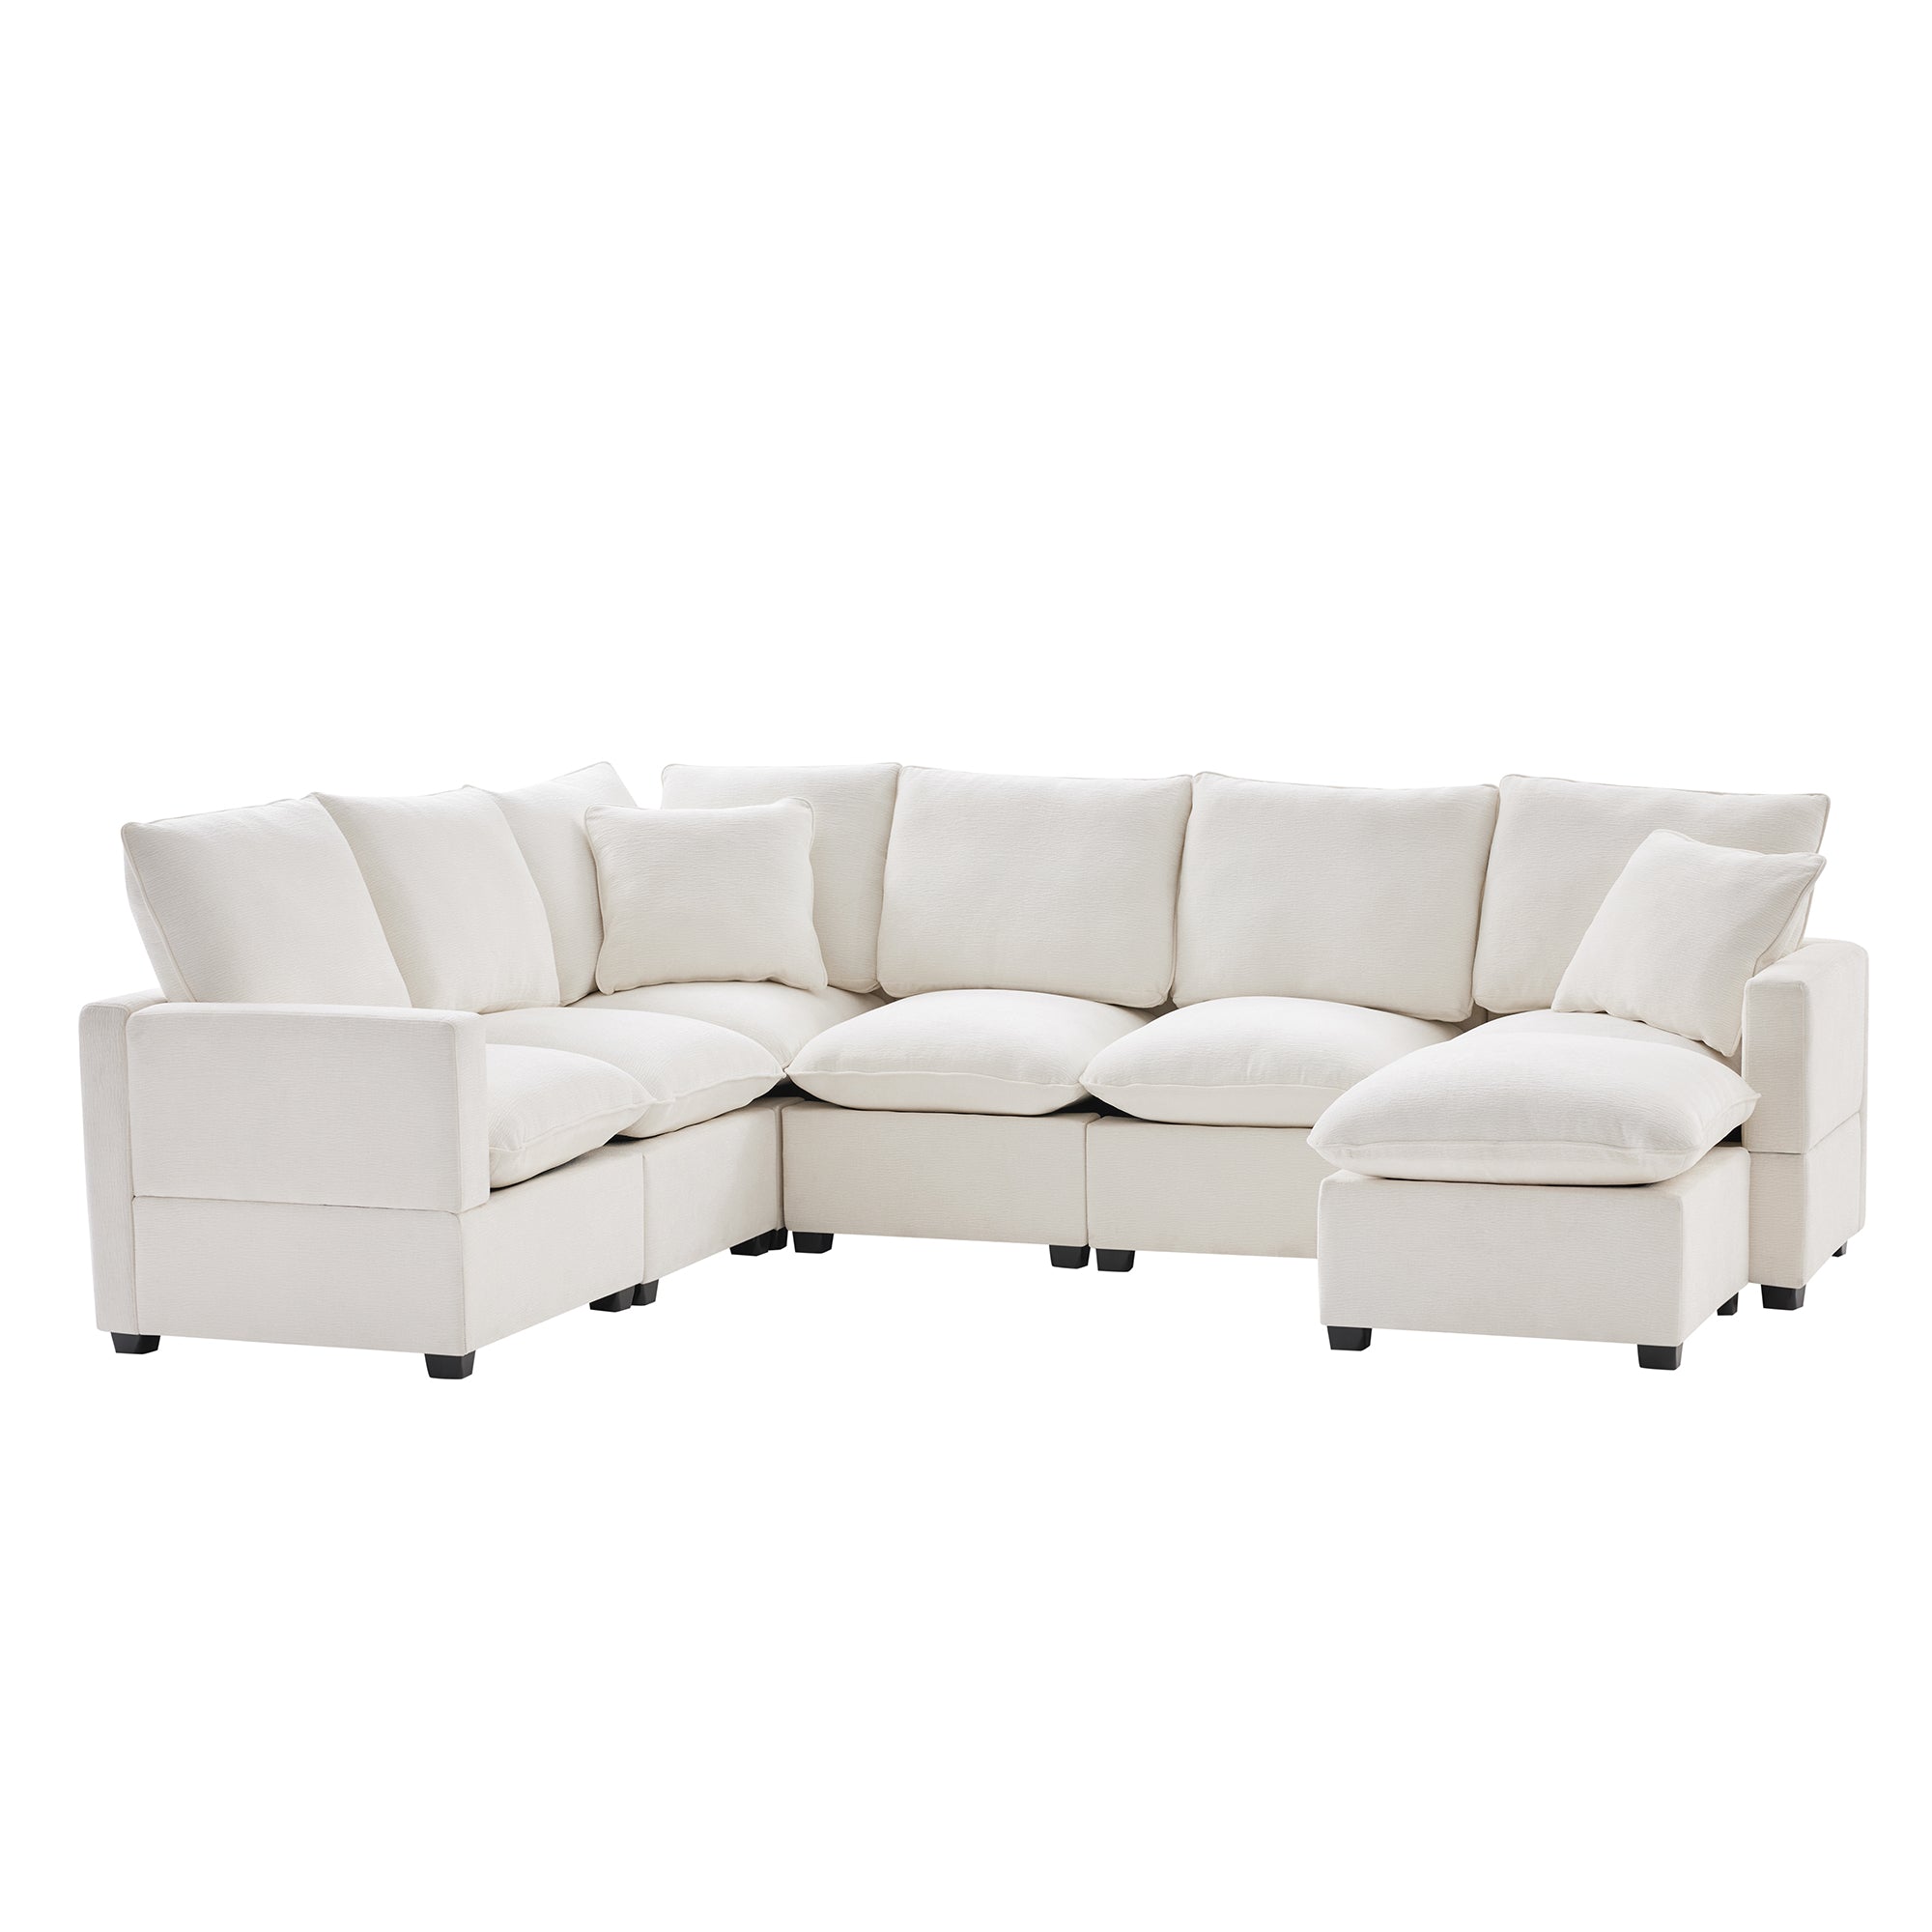 Bellemave® 110" U-Shape Modern Chenille Modular Sofa with 2 Pillows Included Bellemave®